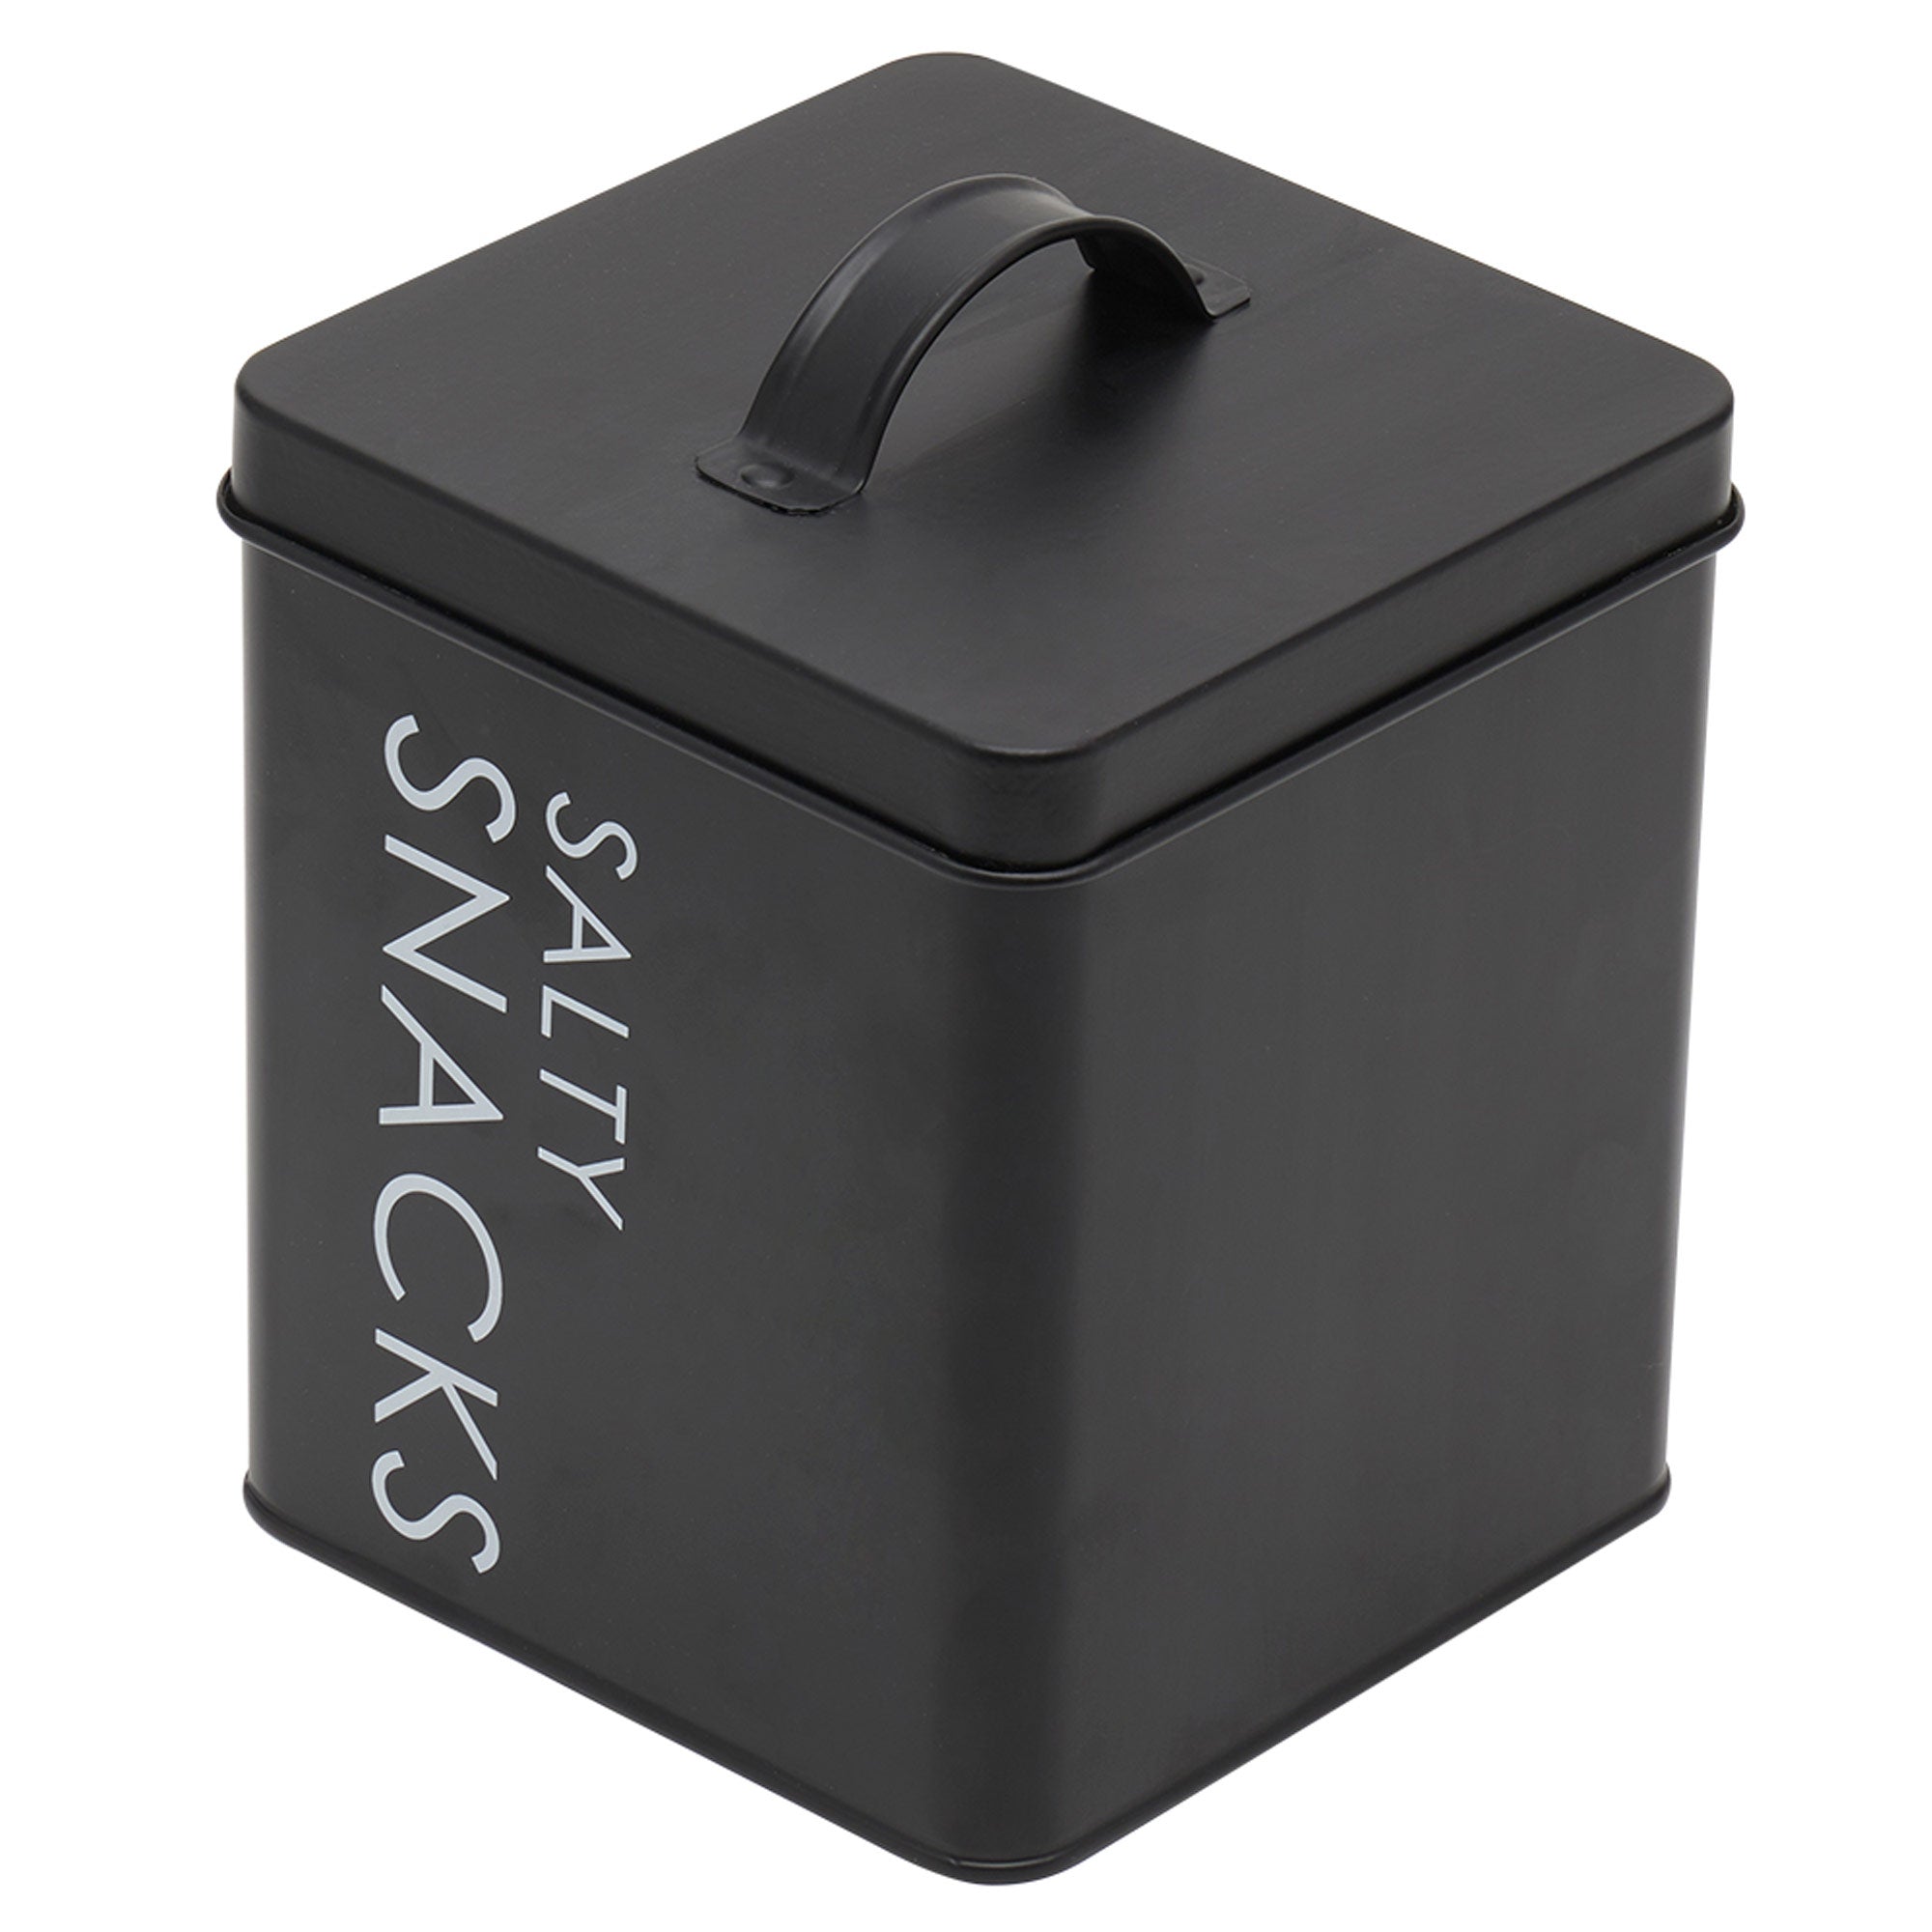 Home Basics Tin Canister, Salty Snacks, Large, Black, 5.5.x5.5x6.5 Inches